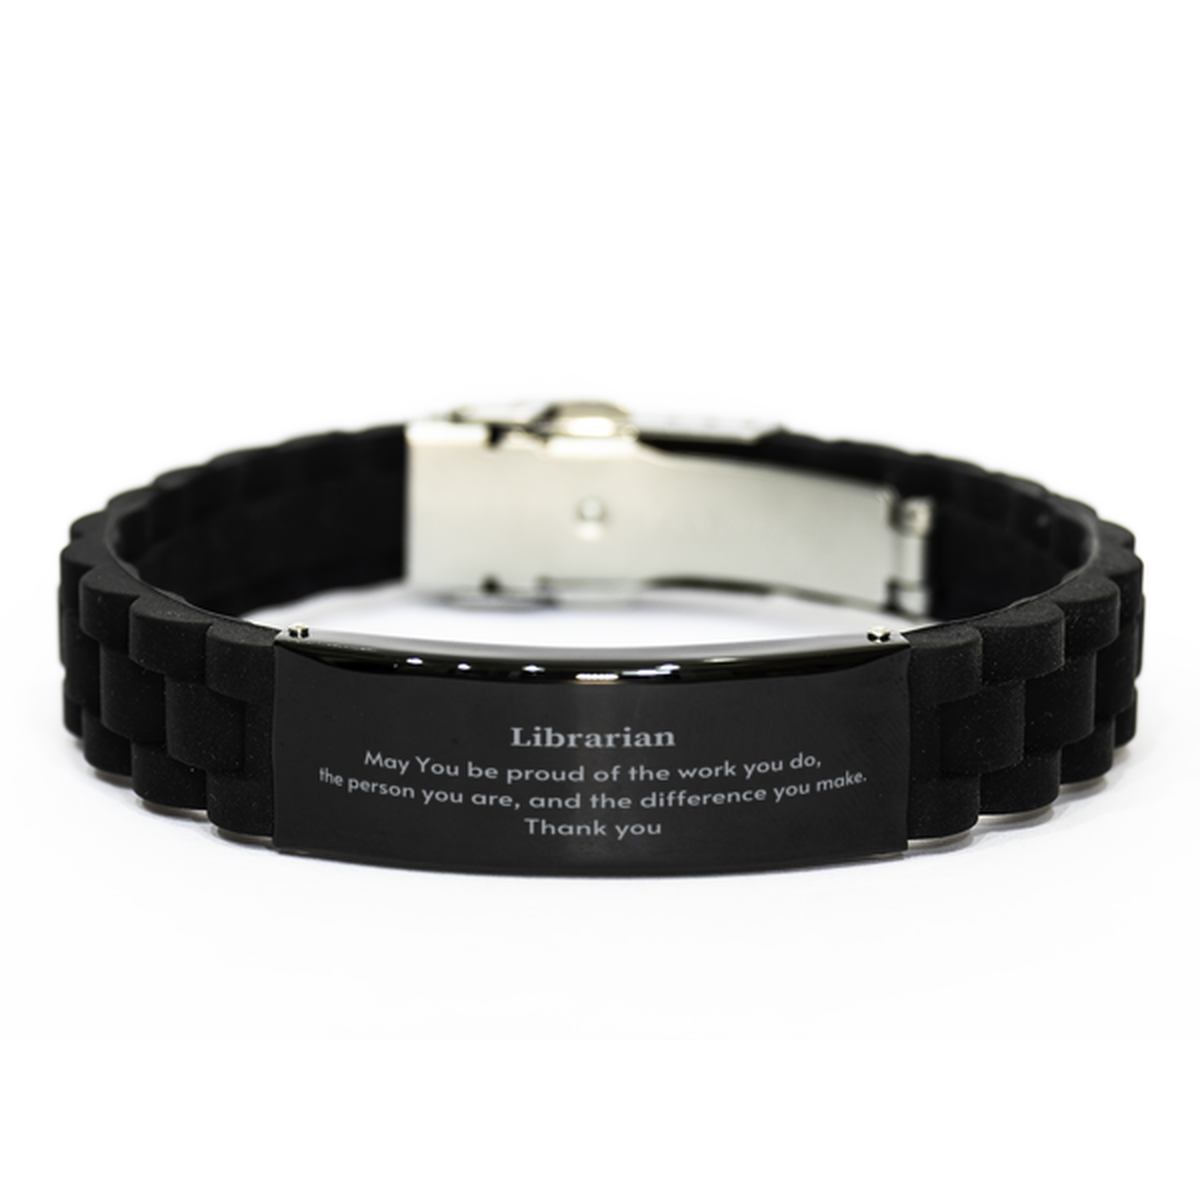 Heartwarming Black Glidelock Clasp Bracelet Retirement Coworkers Gifts for Librarian, Librarian May You be proud of the work you do, the person you are Gifts for Boss Men Women Friends